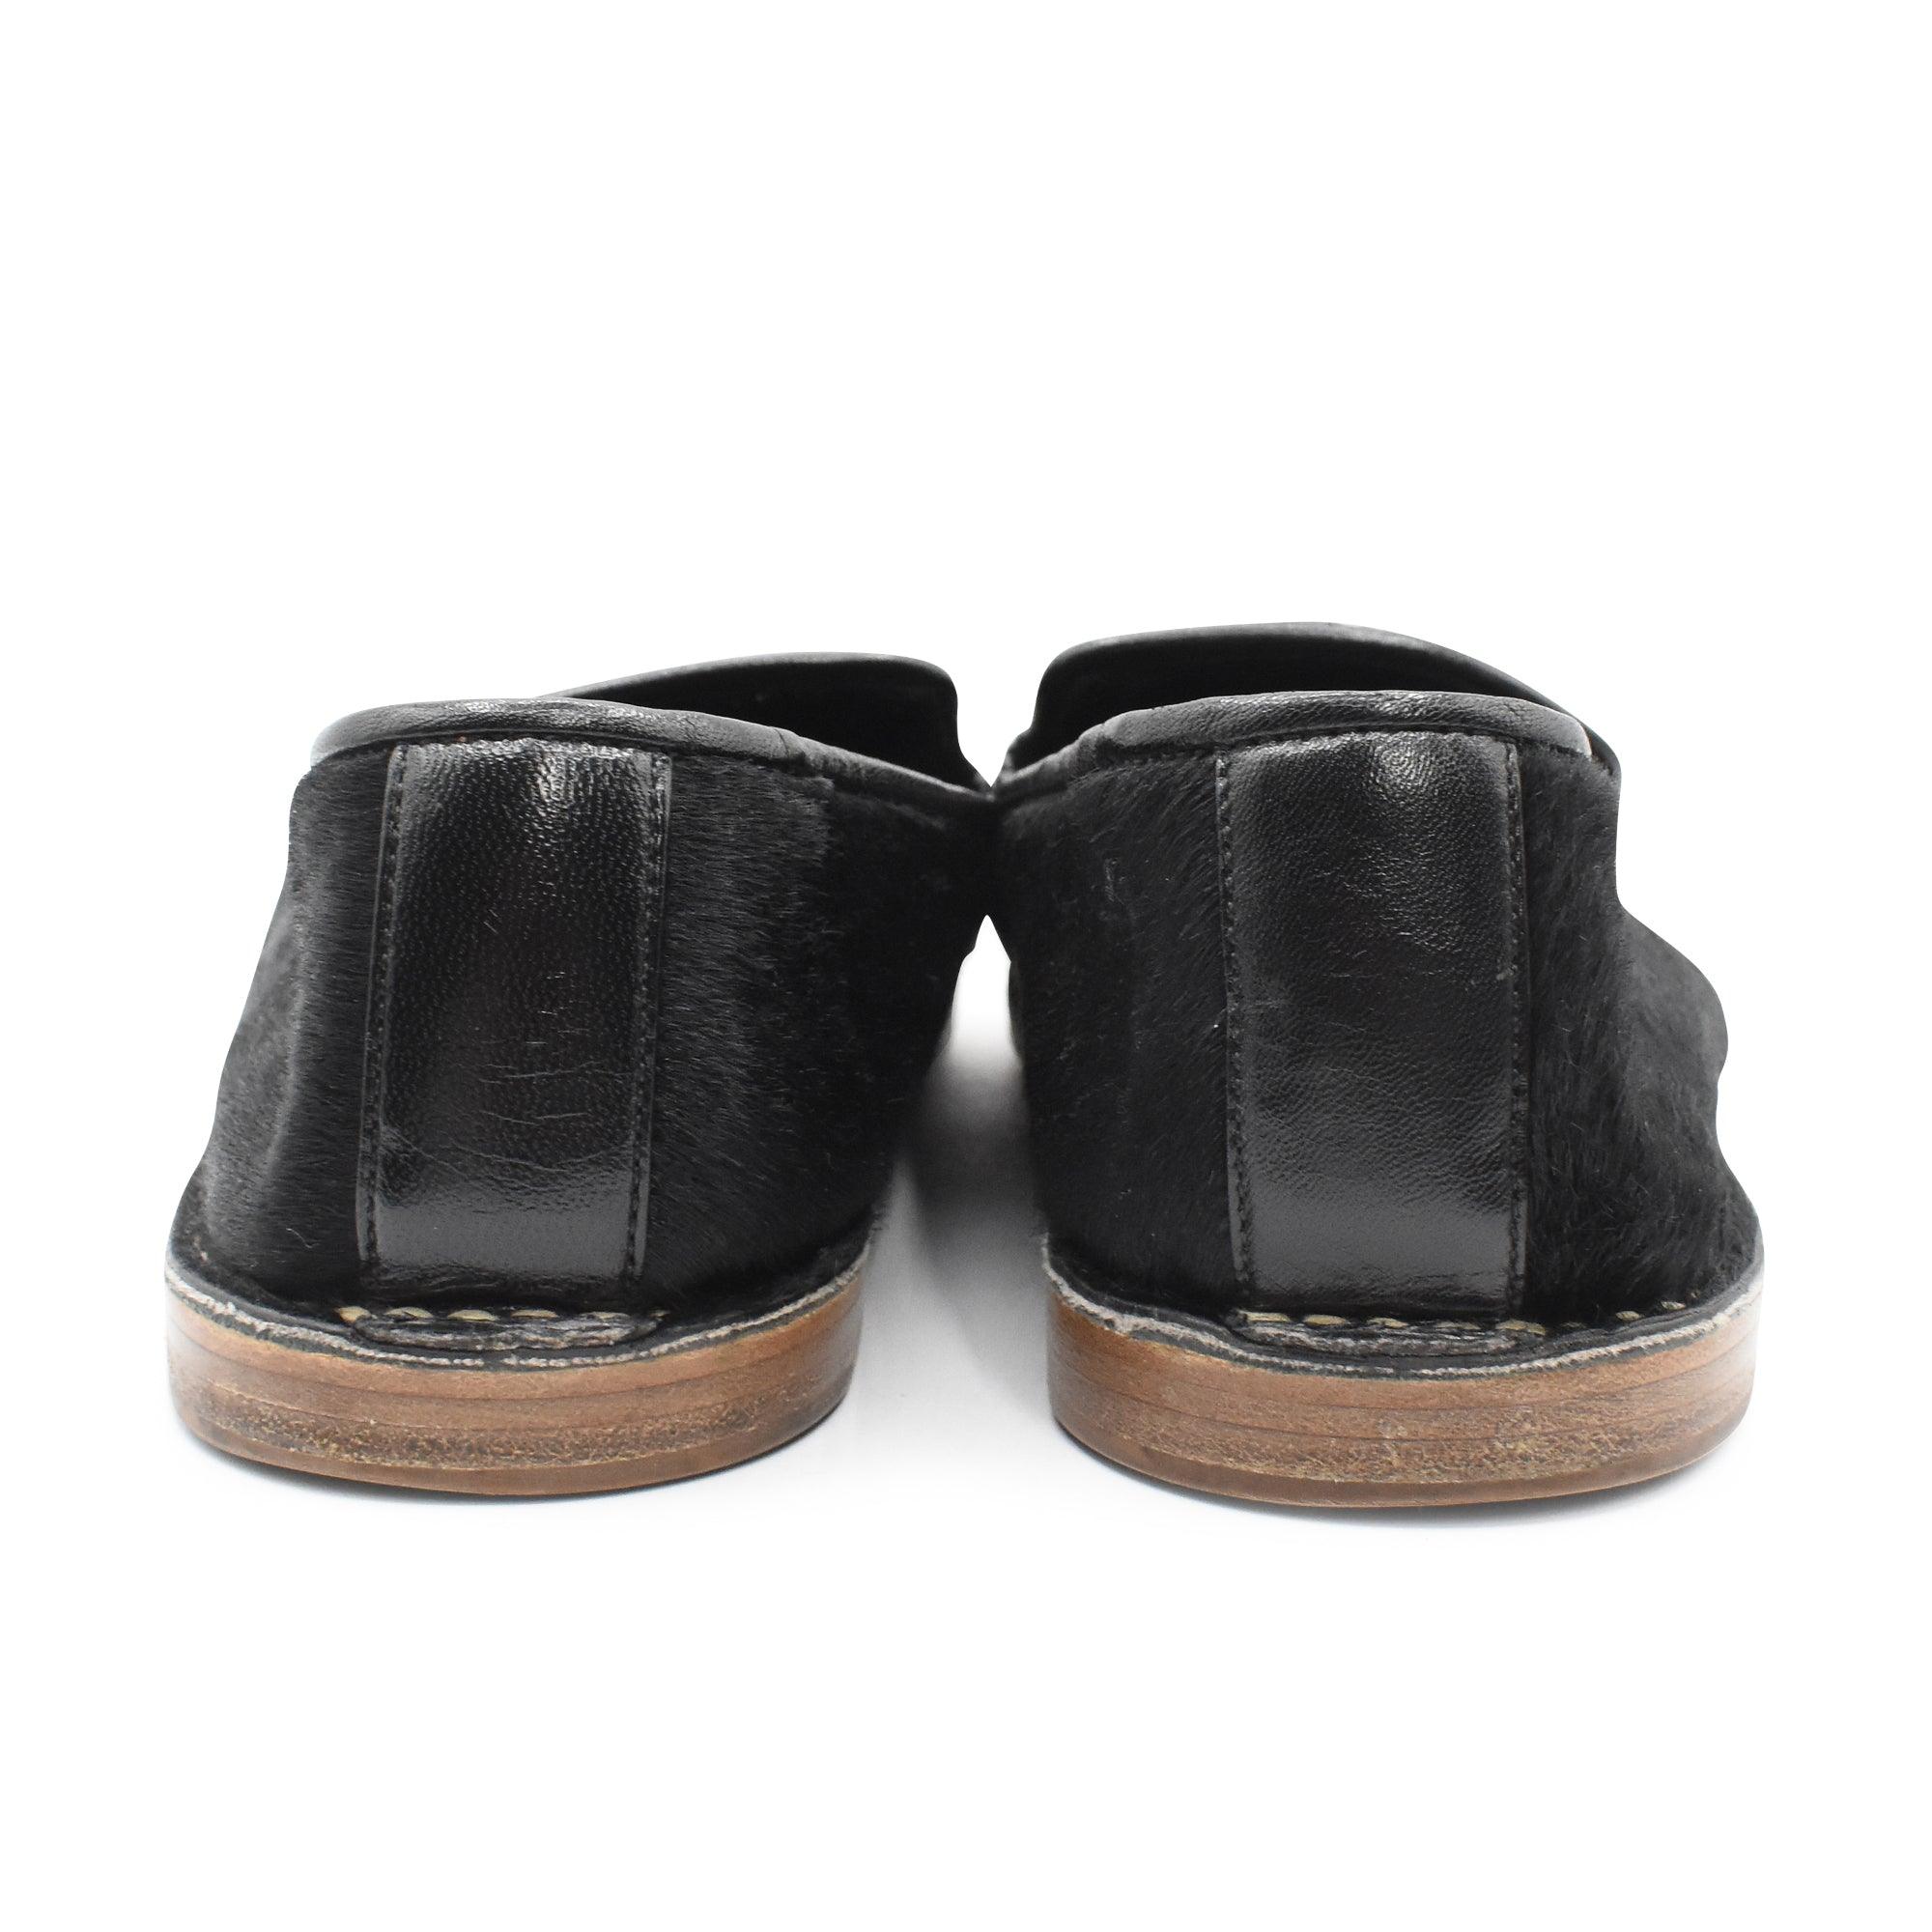 Celine Loafers - Women's 38.5 - Fashionably Yours